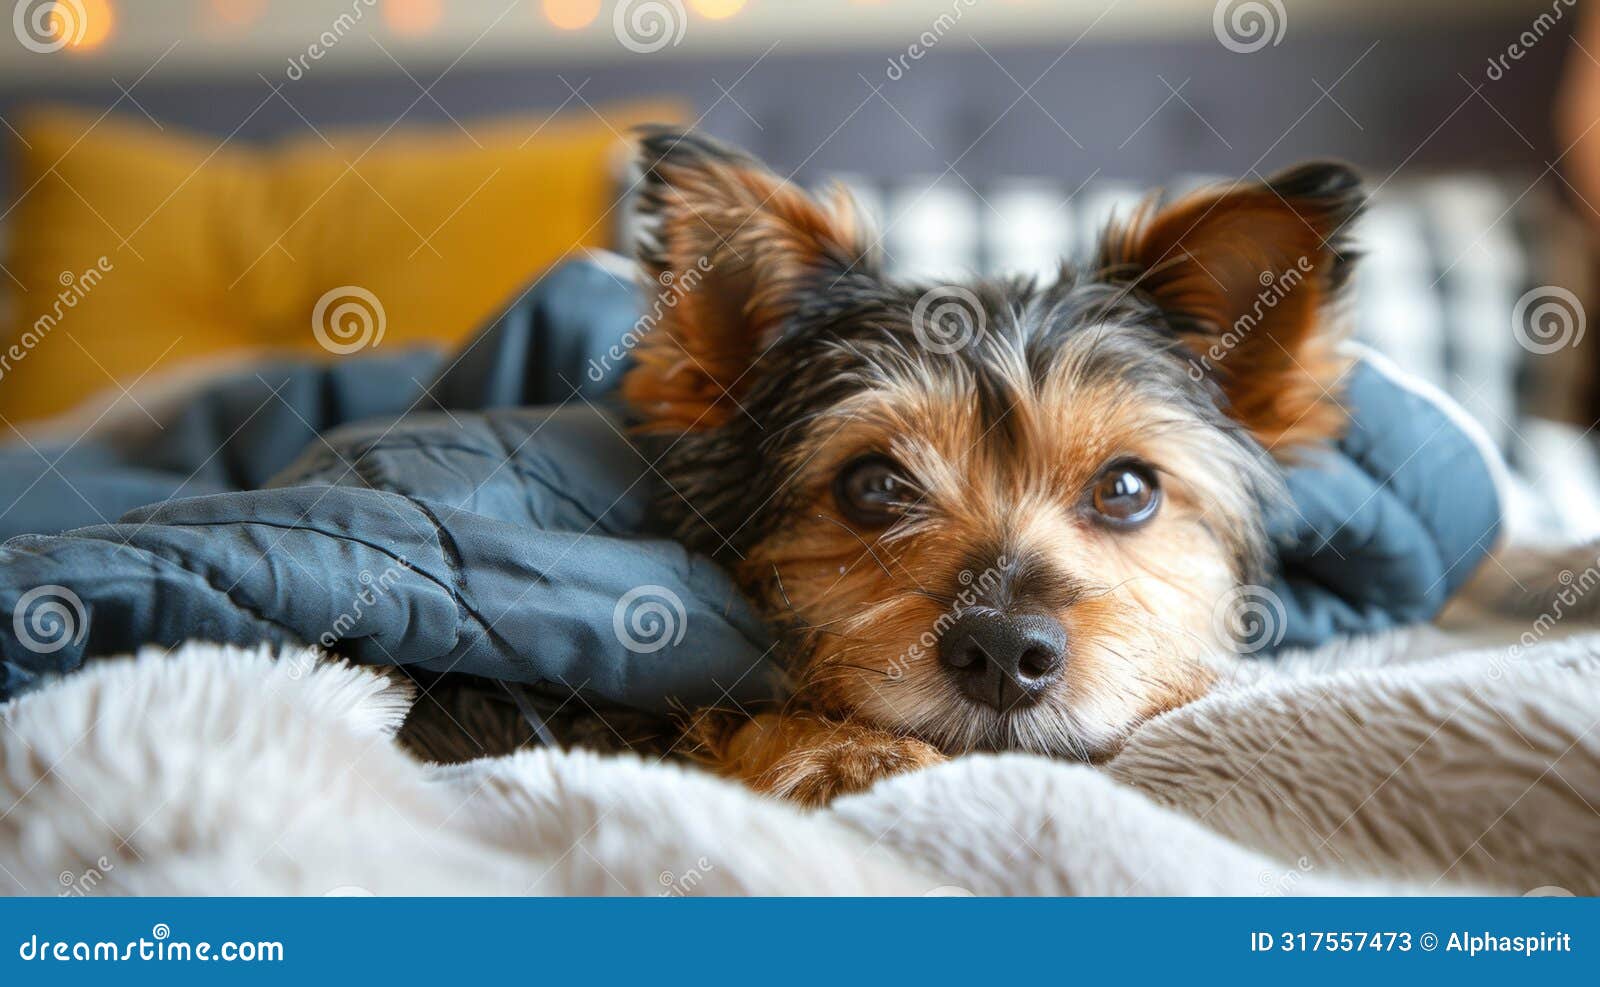 charming small dog snuggles in a soft bed, bringing warmth and comfort to any space